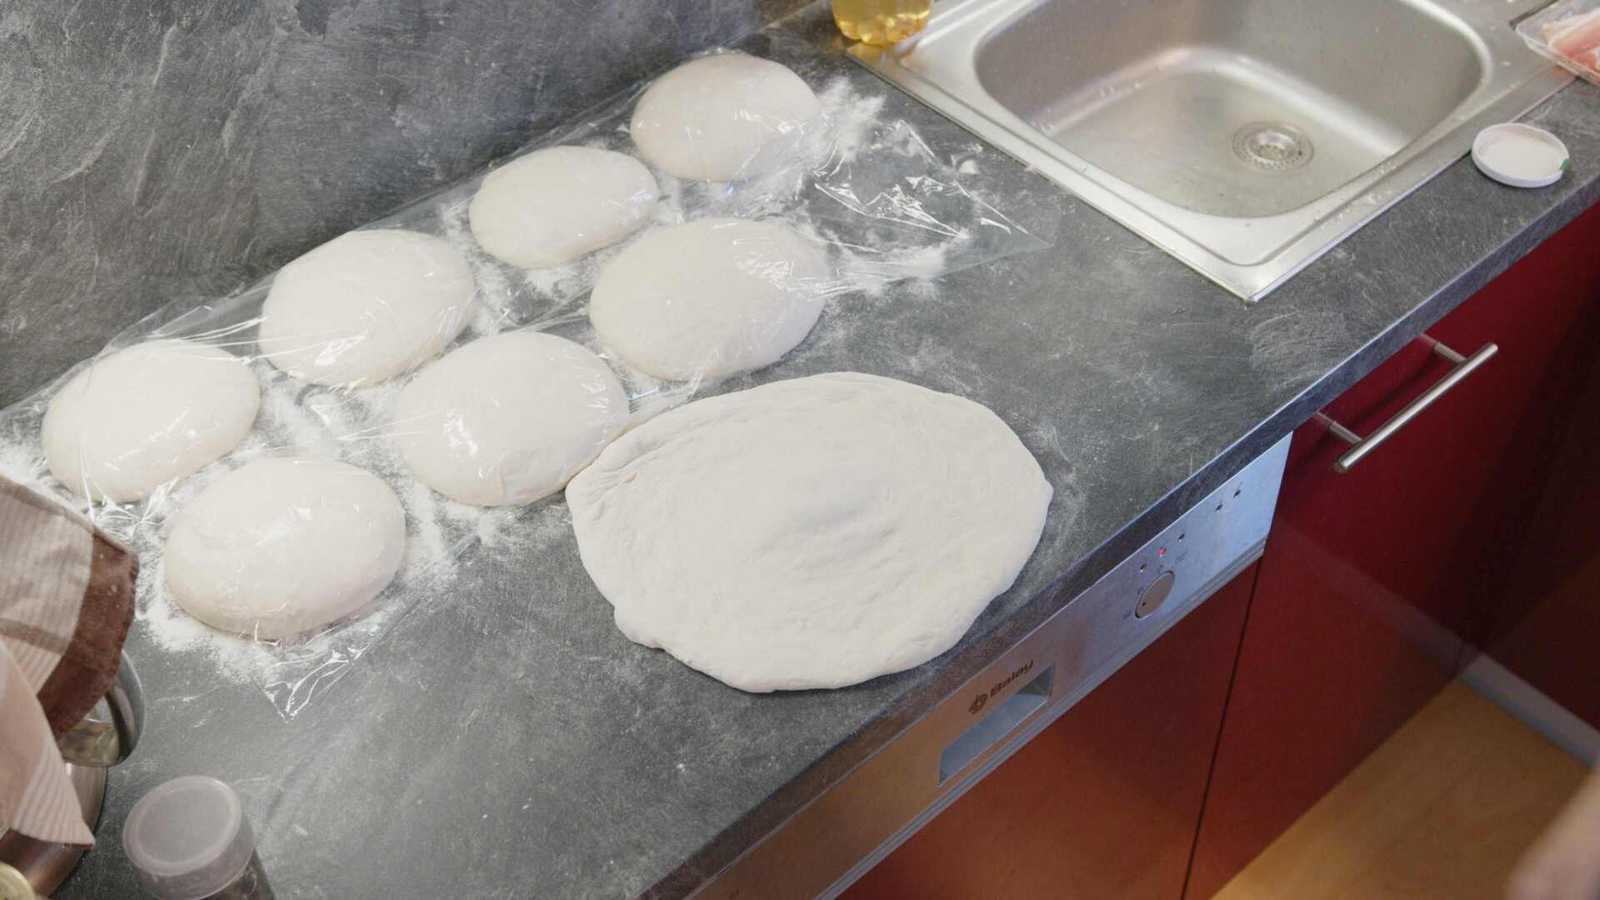 Dough formed into a pizza shape